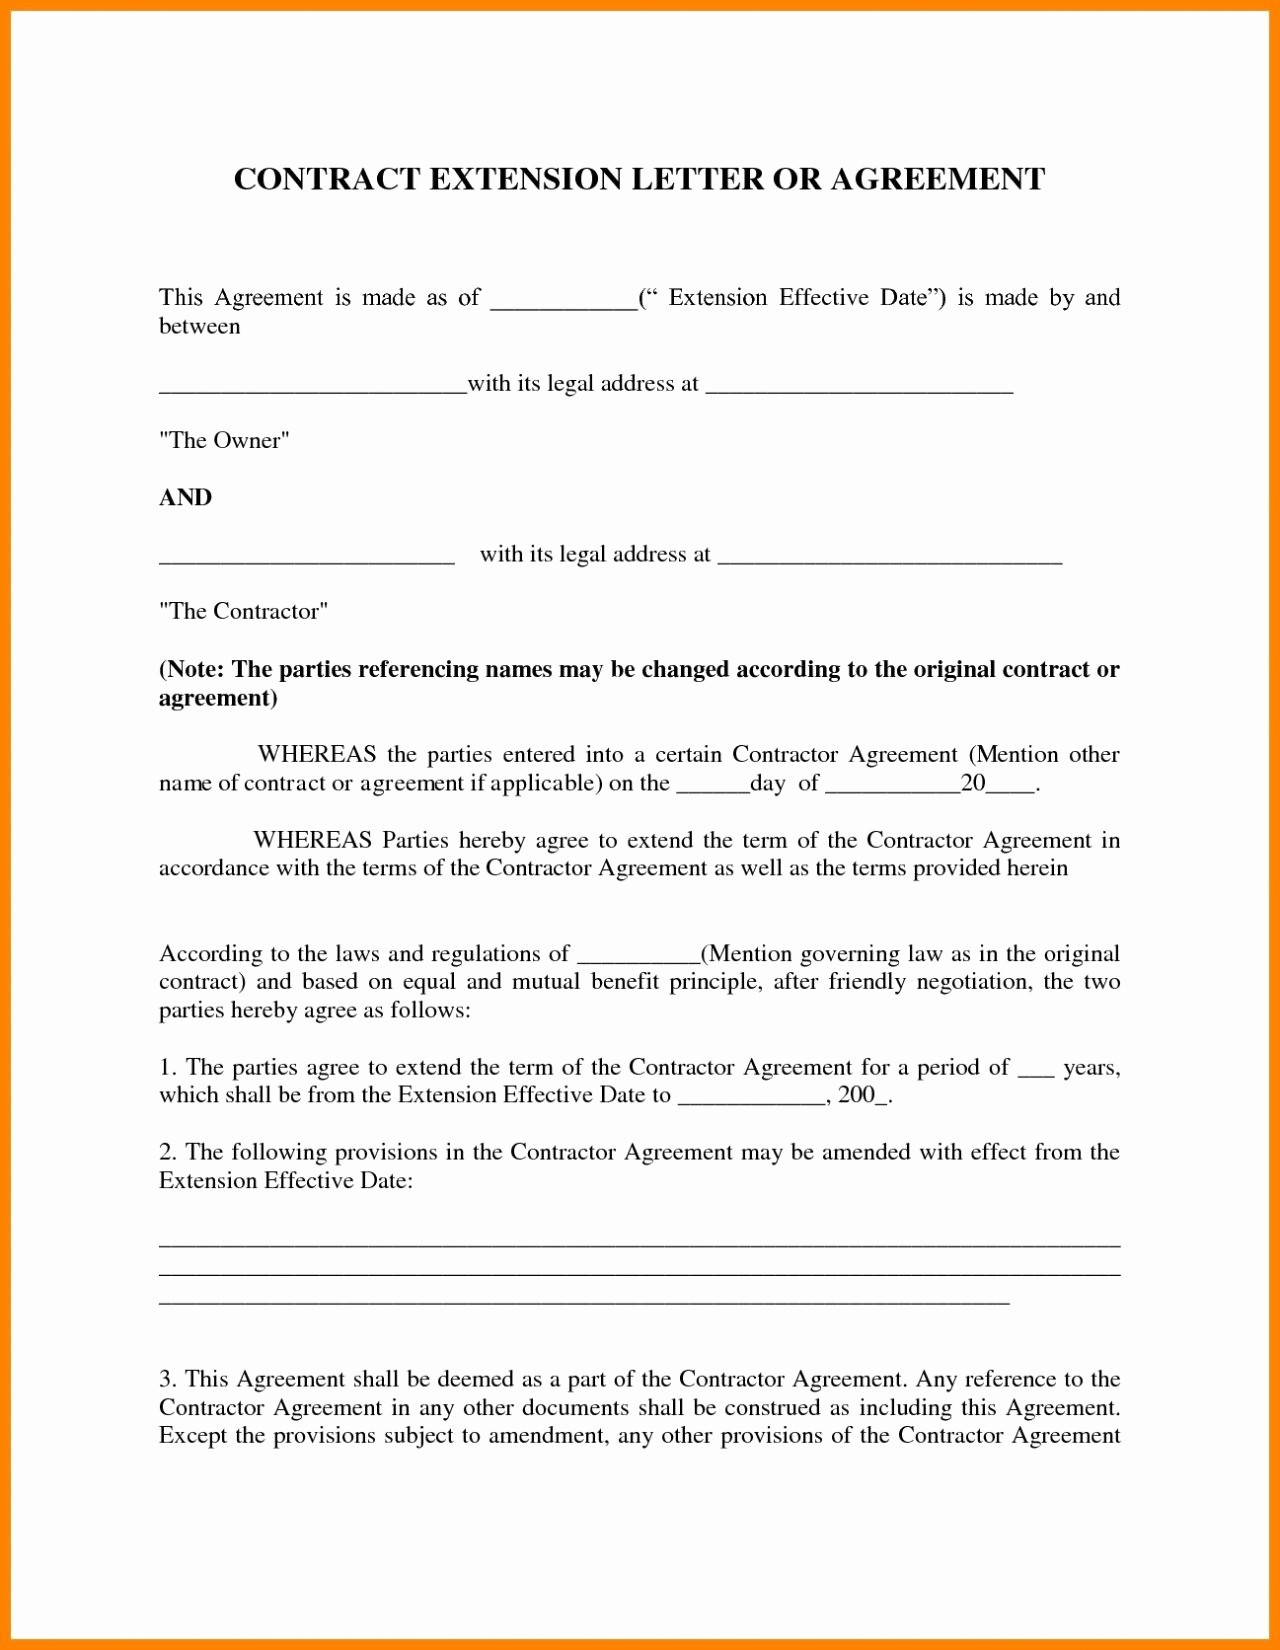 Child Support Letter Of Agreement Template Free Creative Contract Document Parent